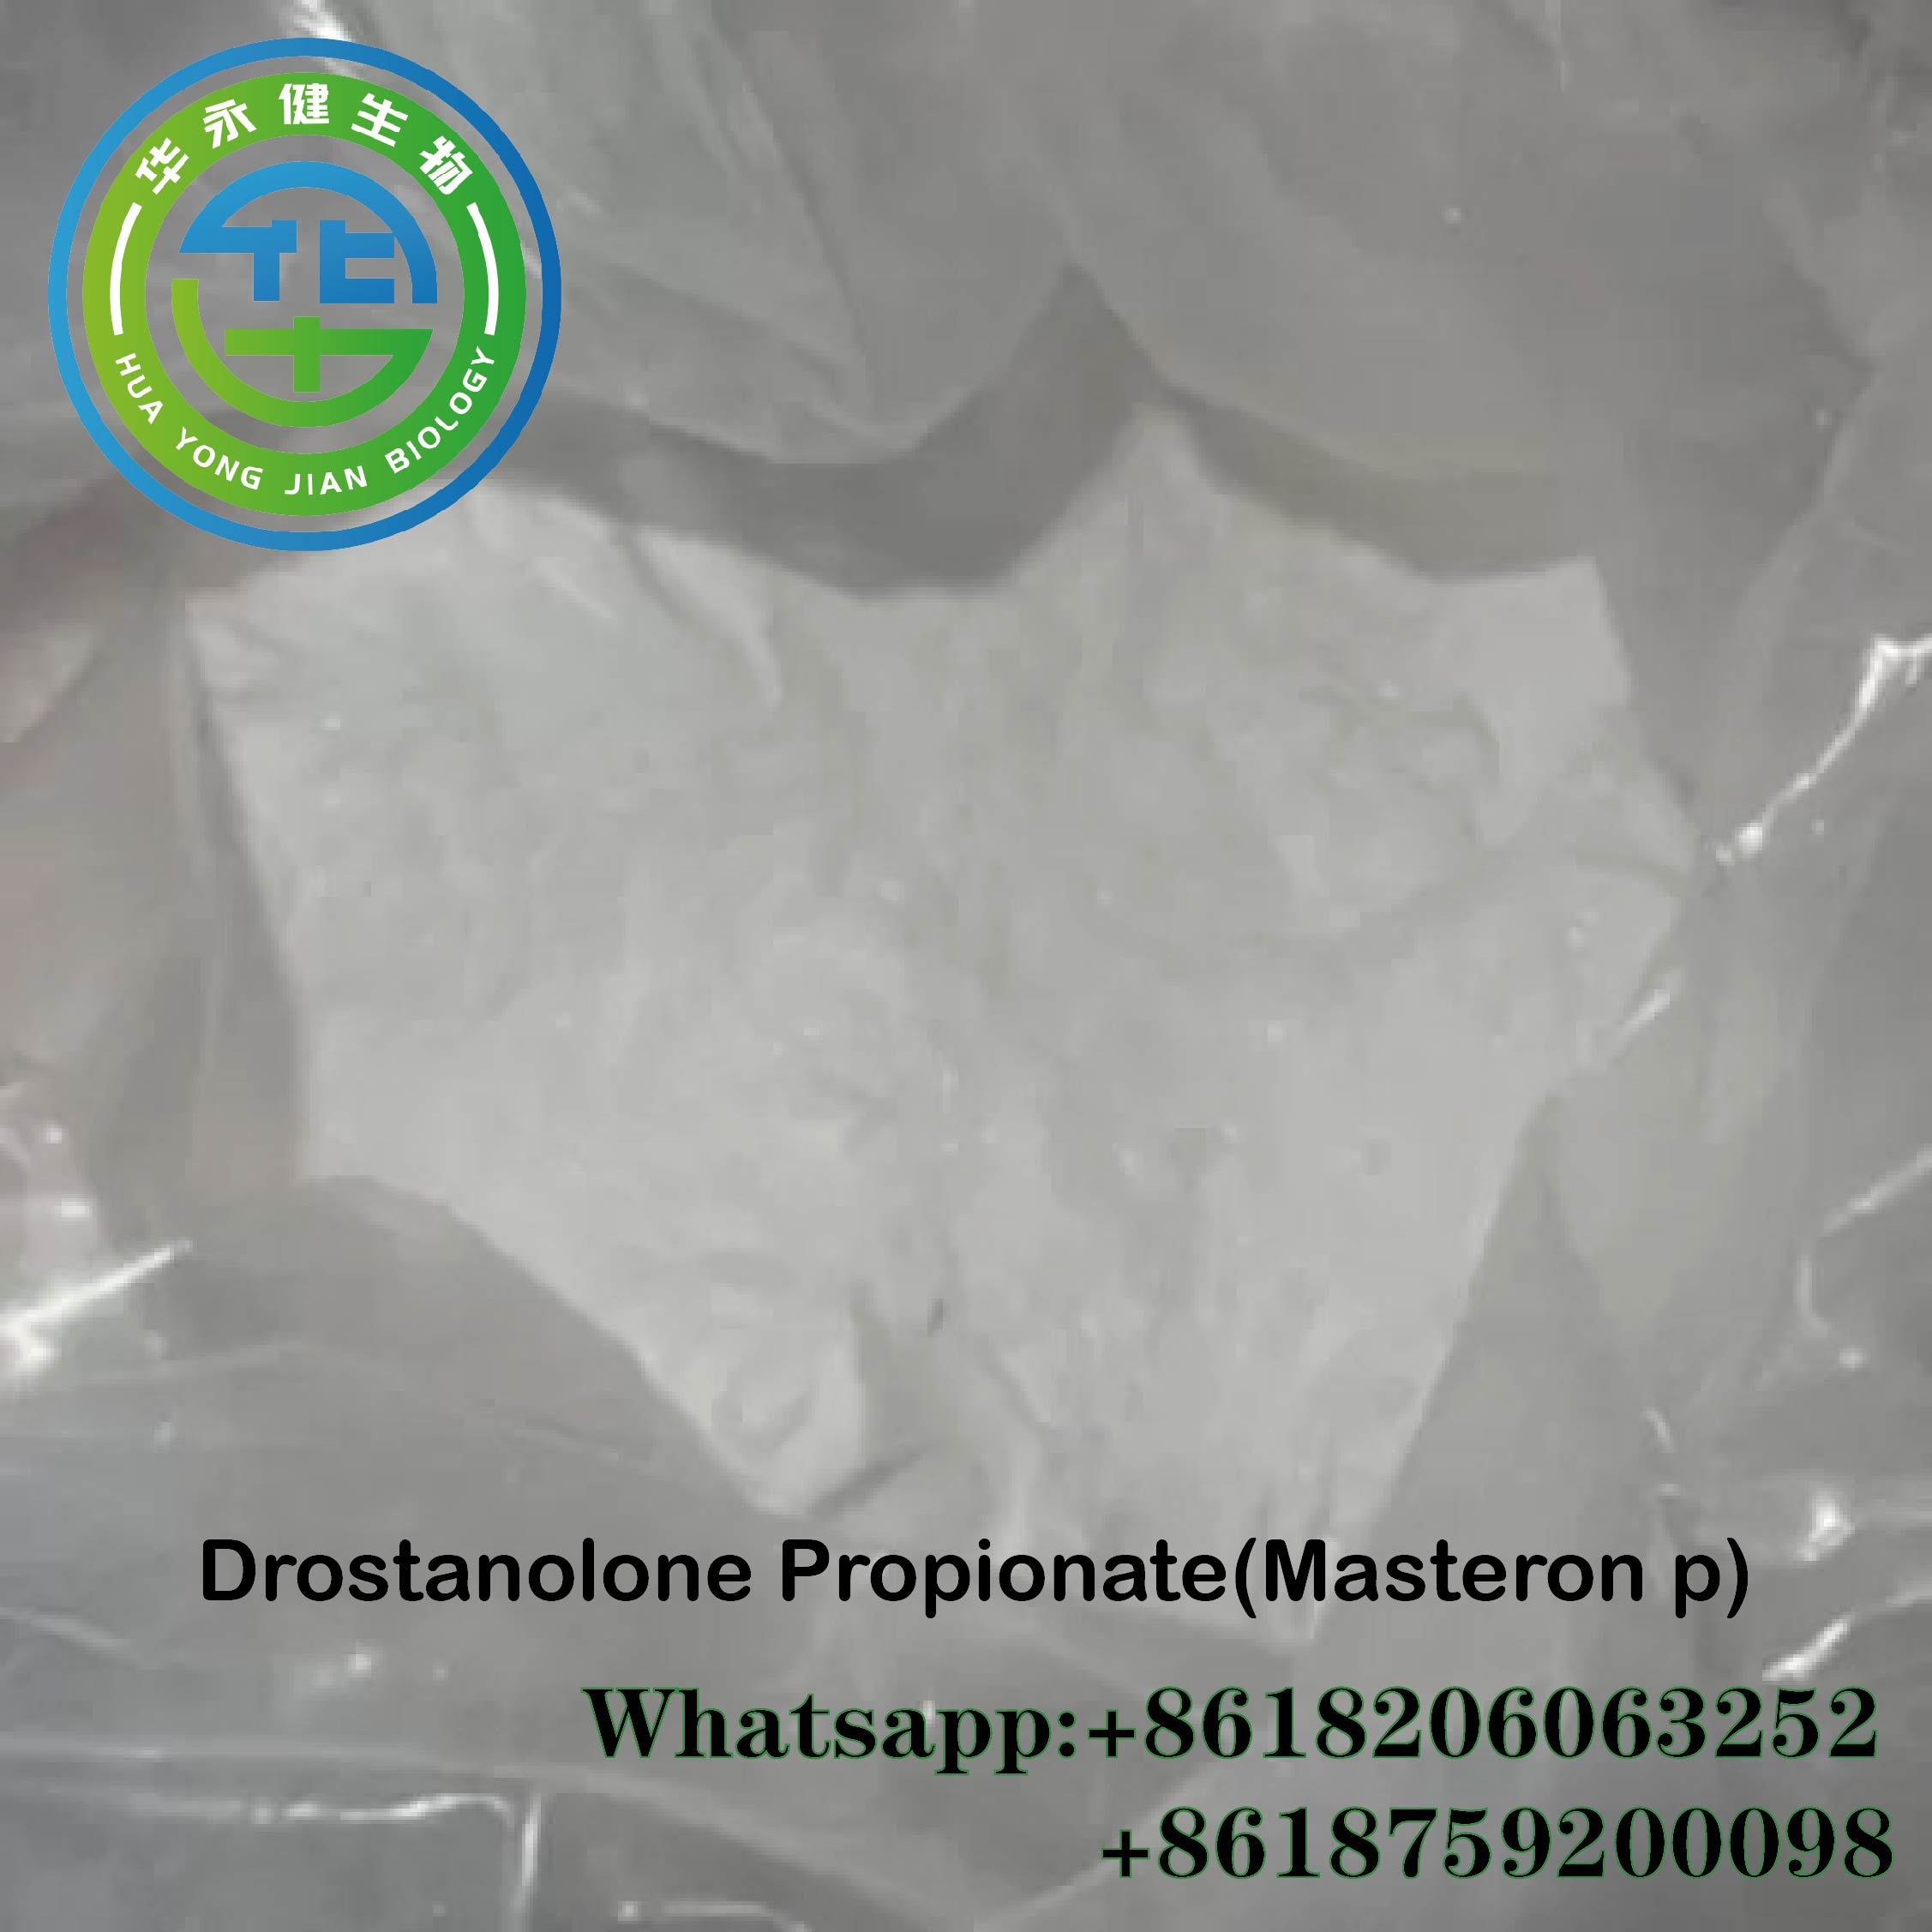 Healthy Drostanolone Propionate CasNO.521-12-0 Masteron P Steroid Anabolic Muscle Building